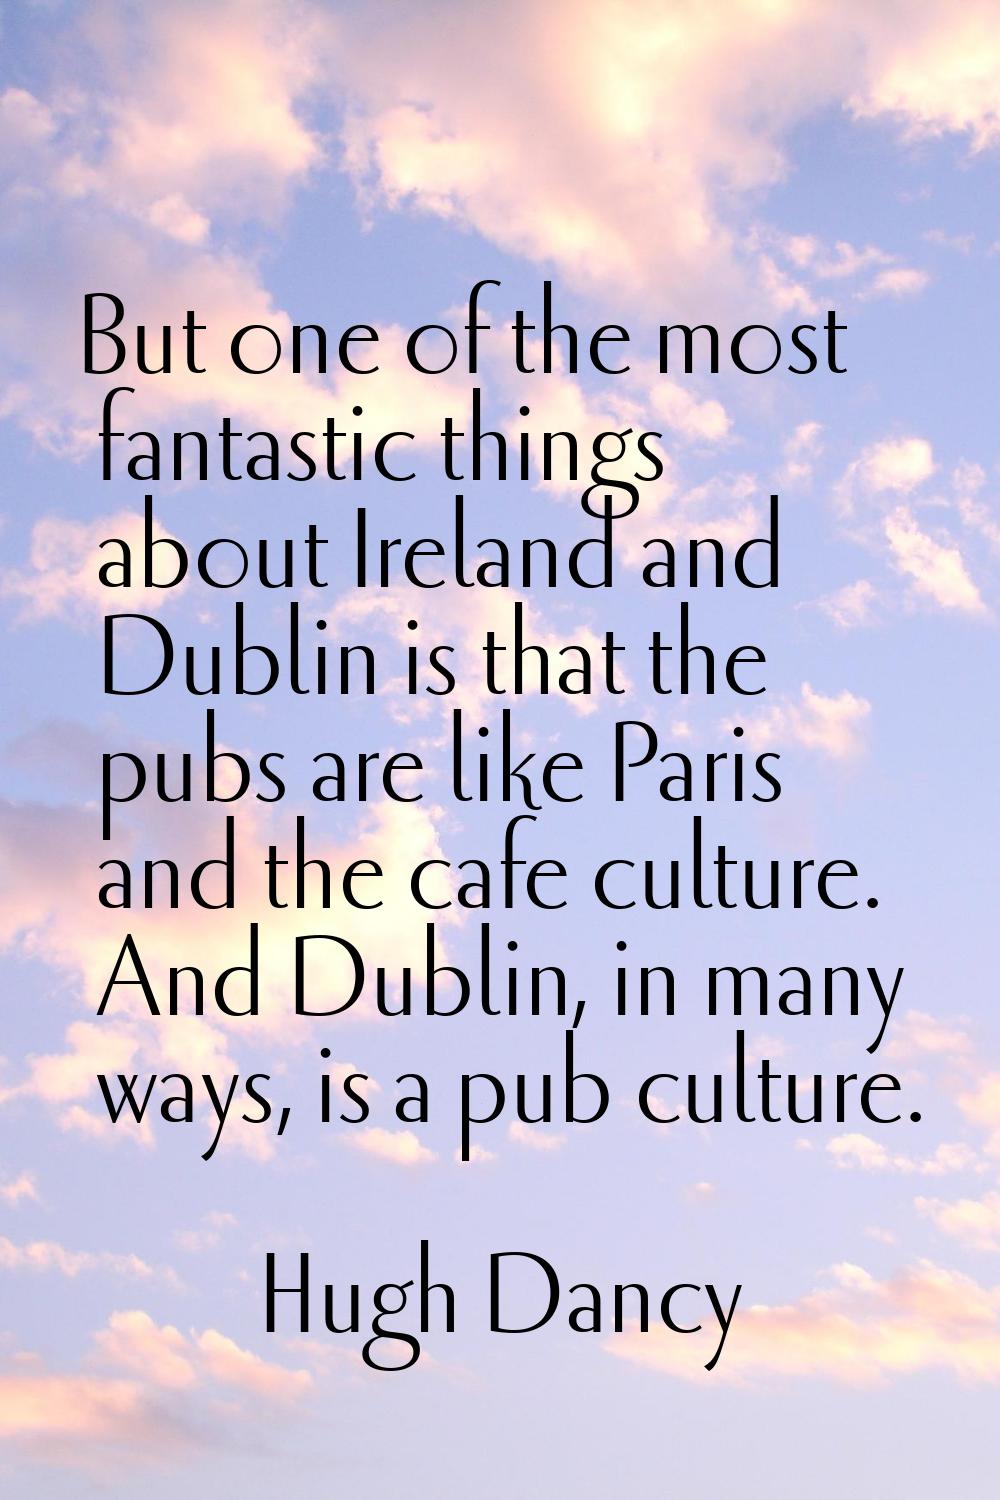 But one of the most fantastic things about Ireland and Dublin is that the pubs are like Paris and t